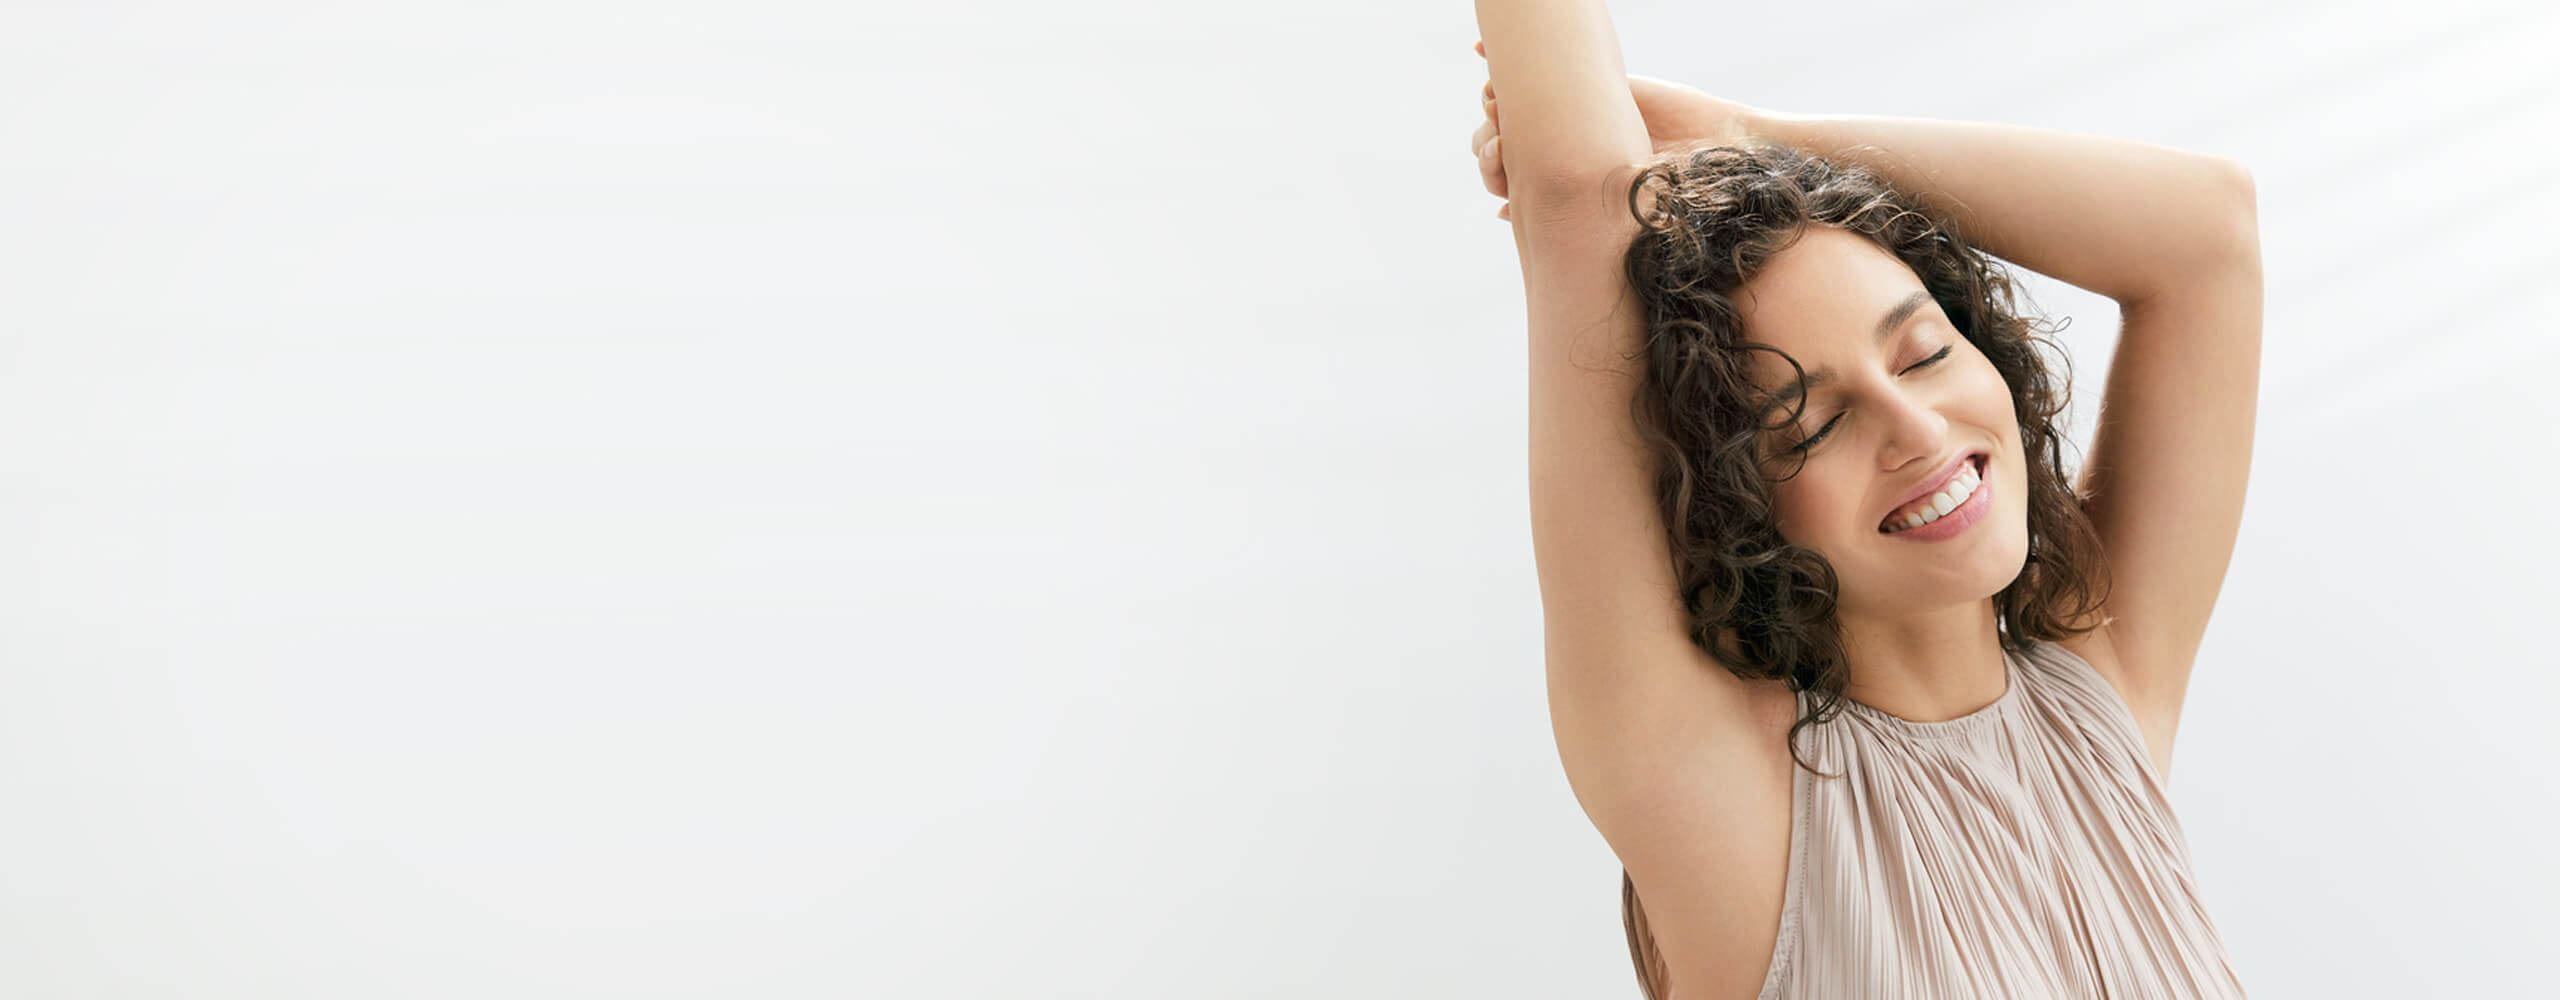 View of a female model with brown curly hair closing her eyes and raising her arms above her head against a grey background.